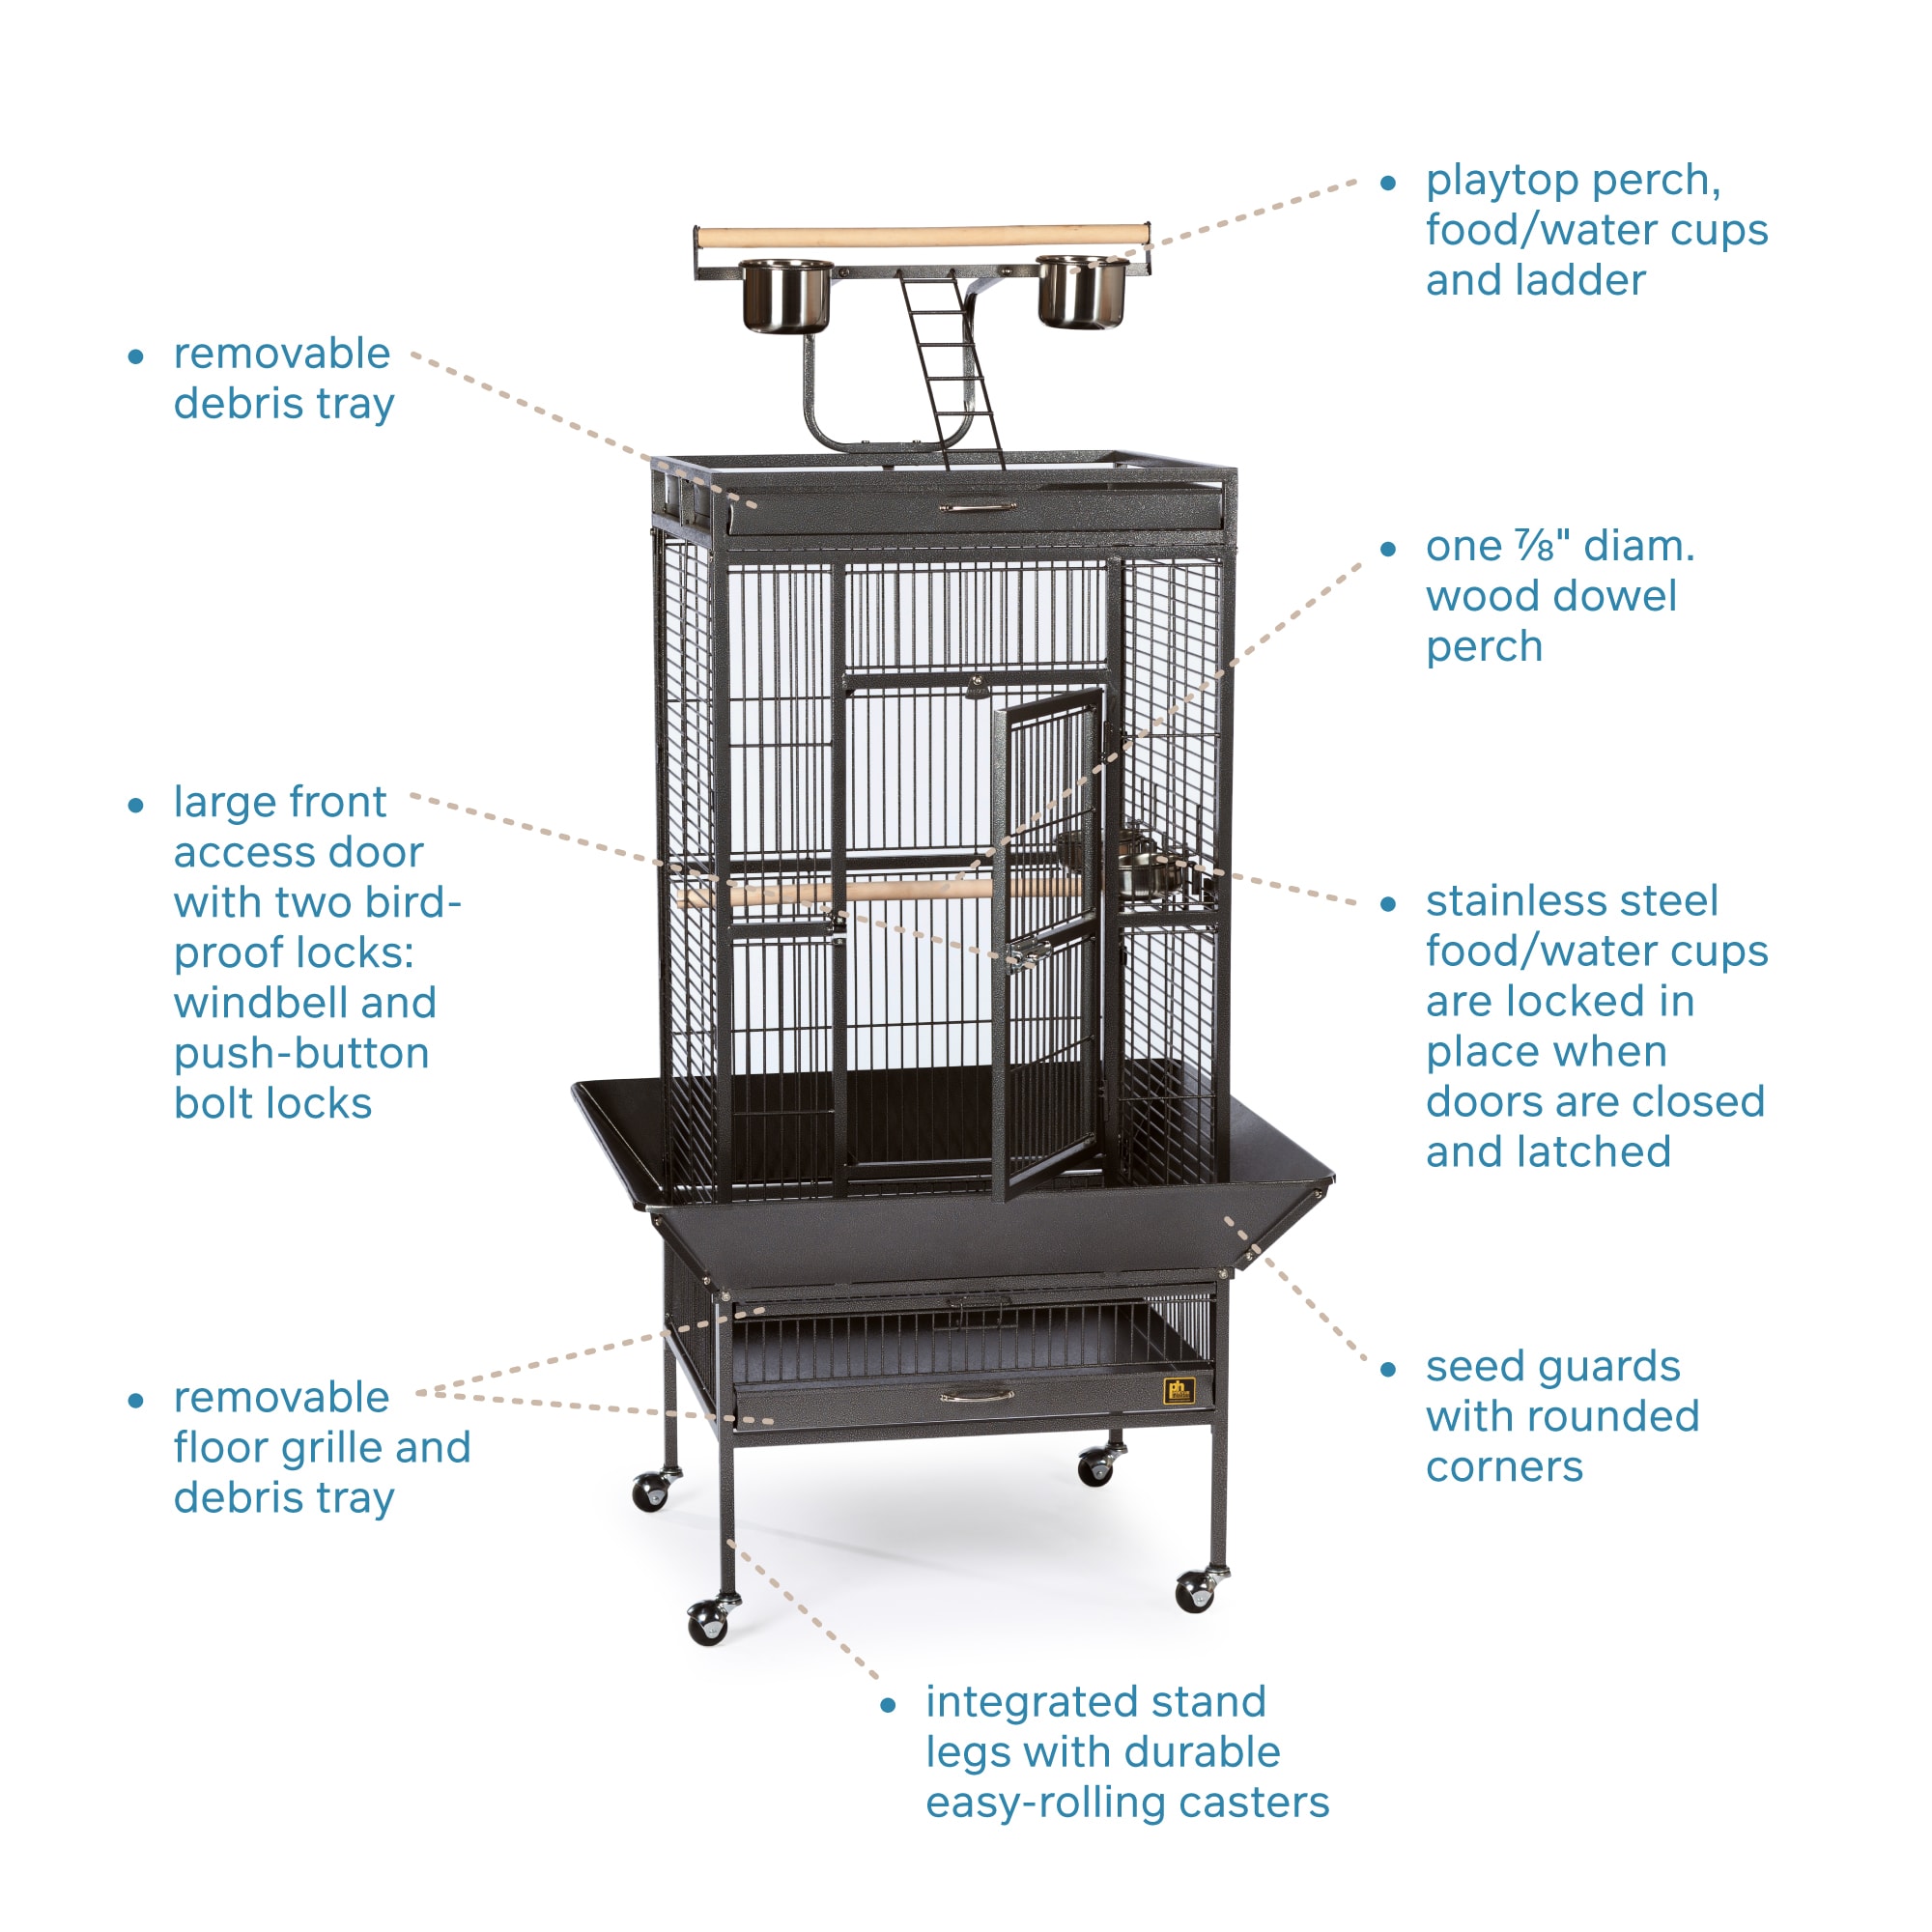 Prevue Hendryx Signature Select Series Wrought Iron Bird Cage in Black